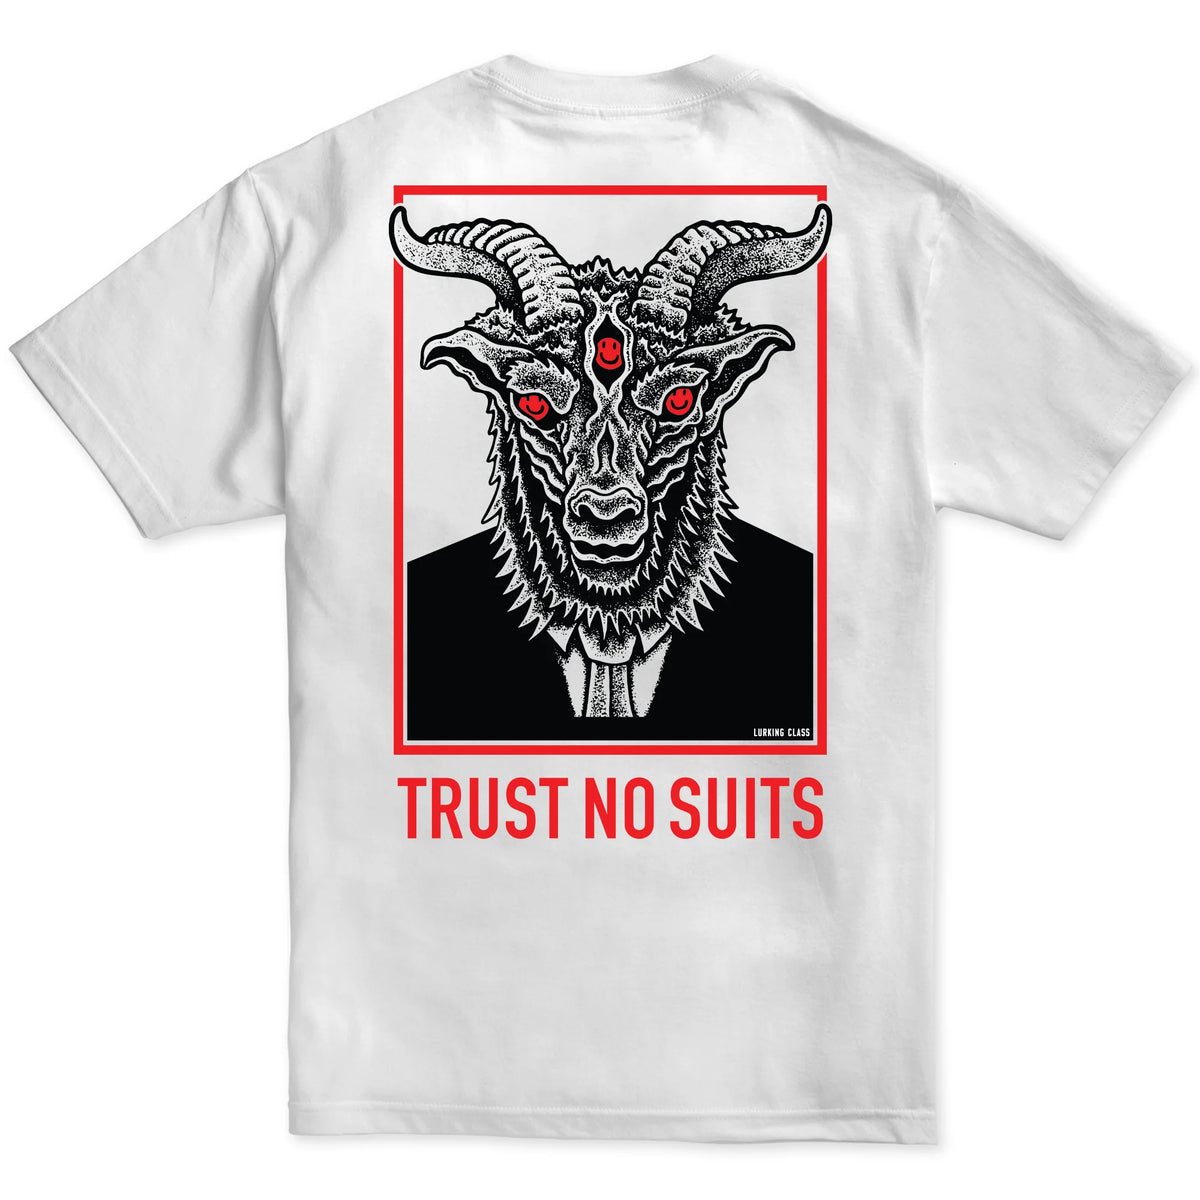 LURKING-CLASS-BY-SKETCHY-TANK-TRUST-NO-SUITS-TEE - T-SHIRT - Synik Clothing - synikclothing.com